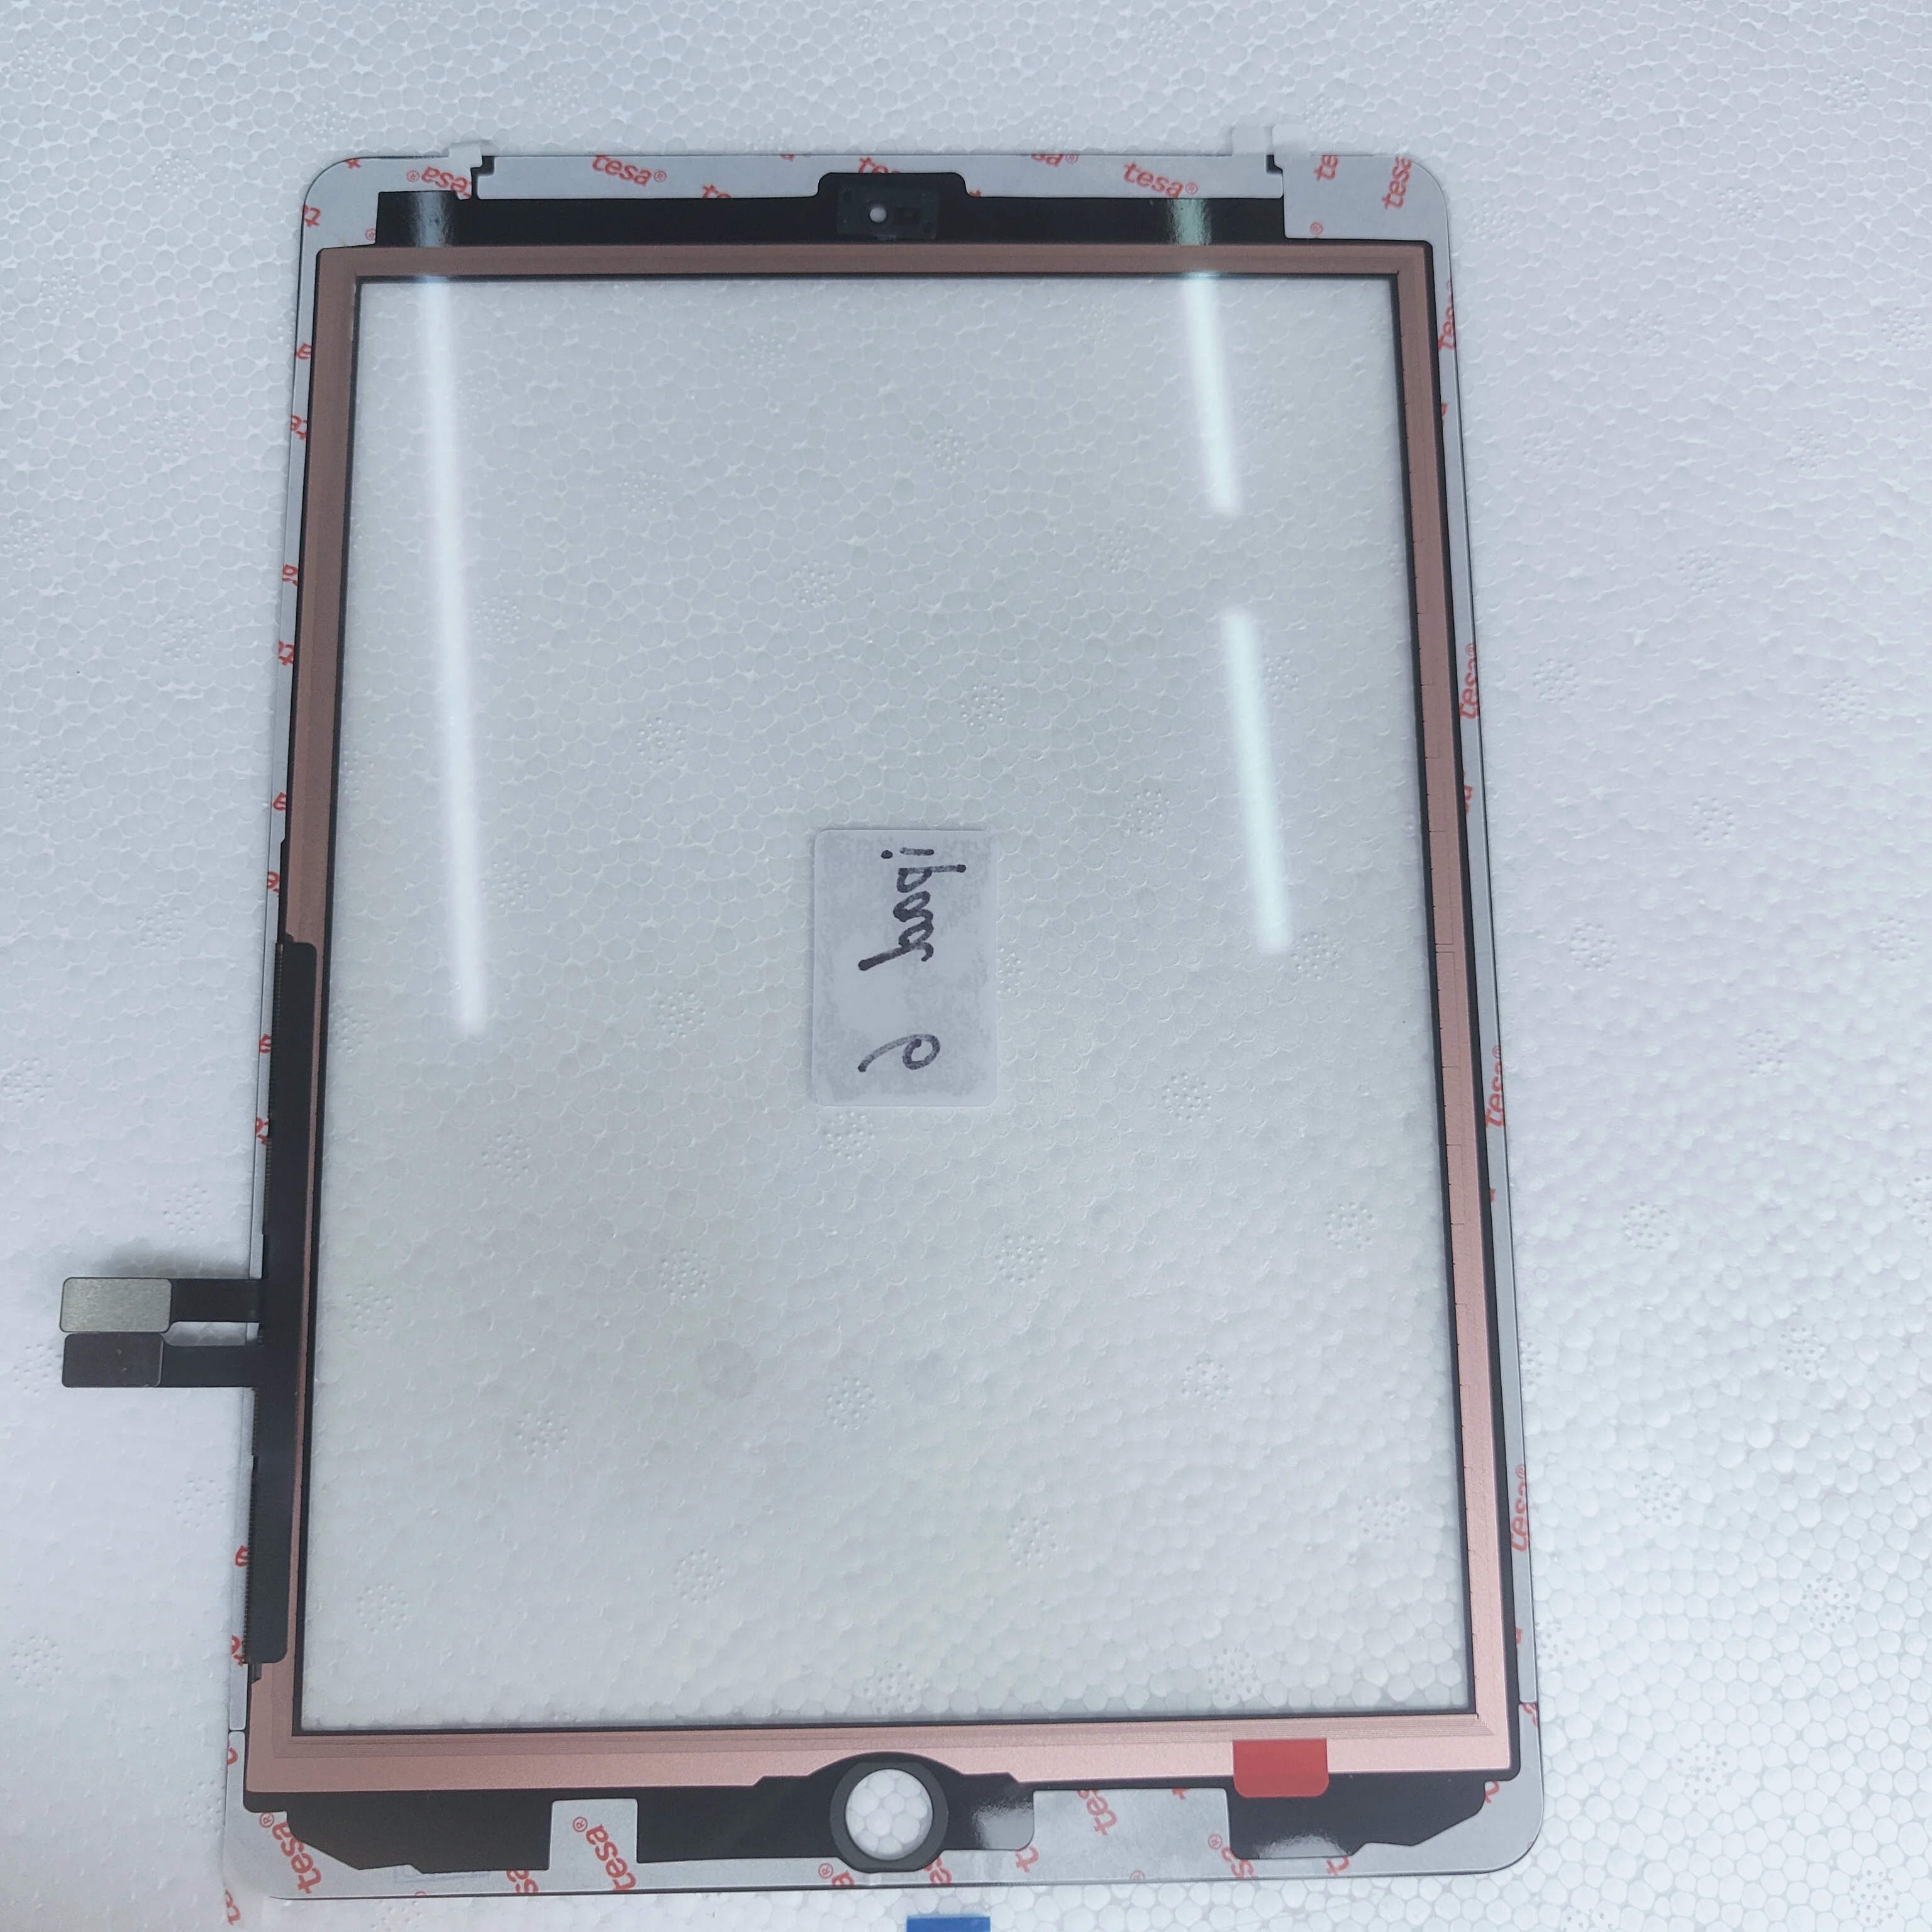 Apple iPad Air 2 A1567/A1566 LCD, Authentic Apple iPad LCD Screens, Crystal Clear Display Replacements